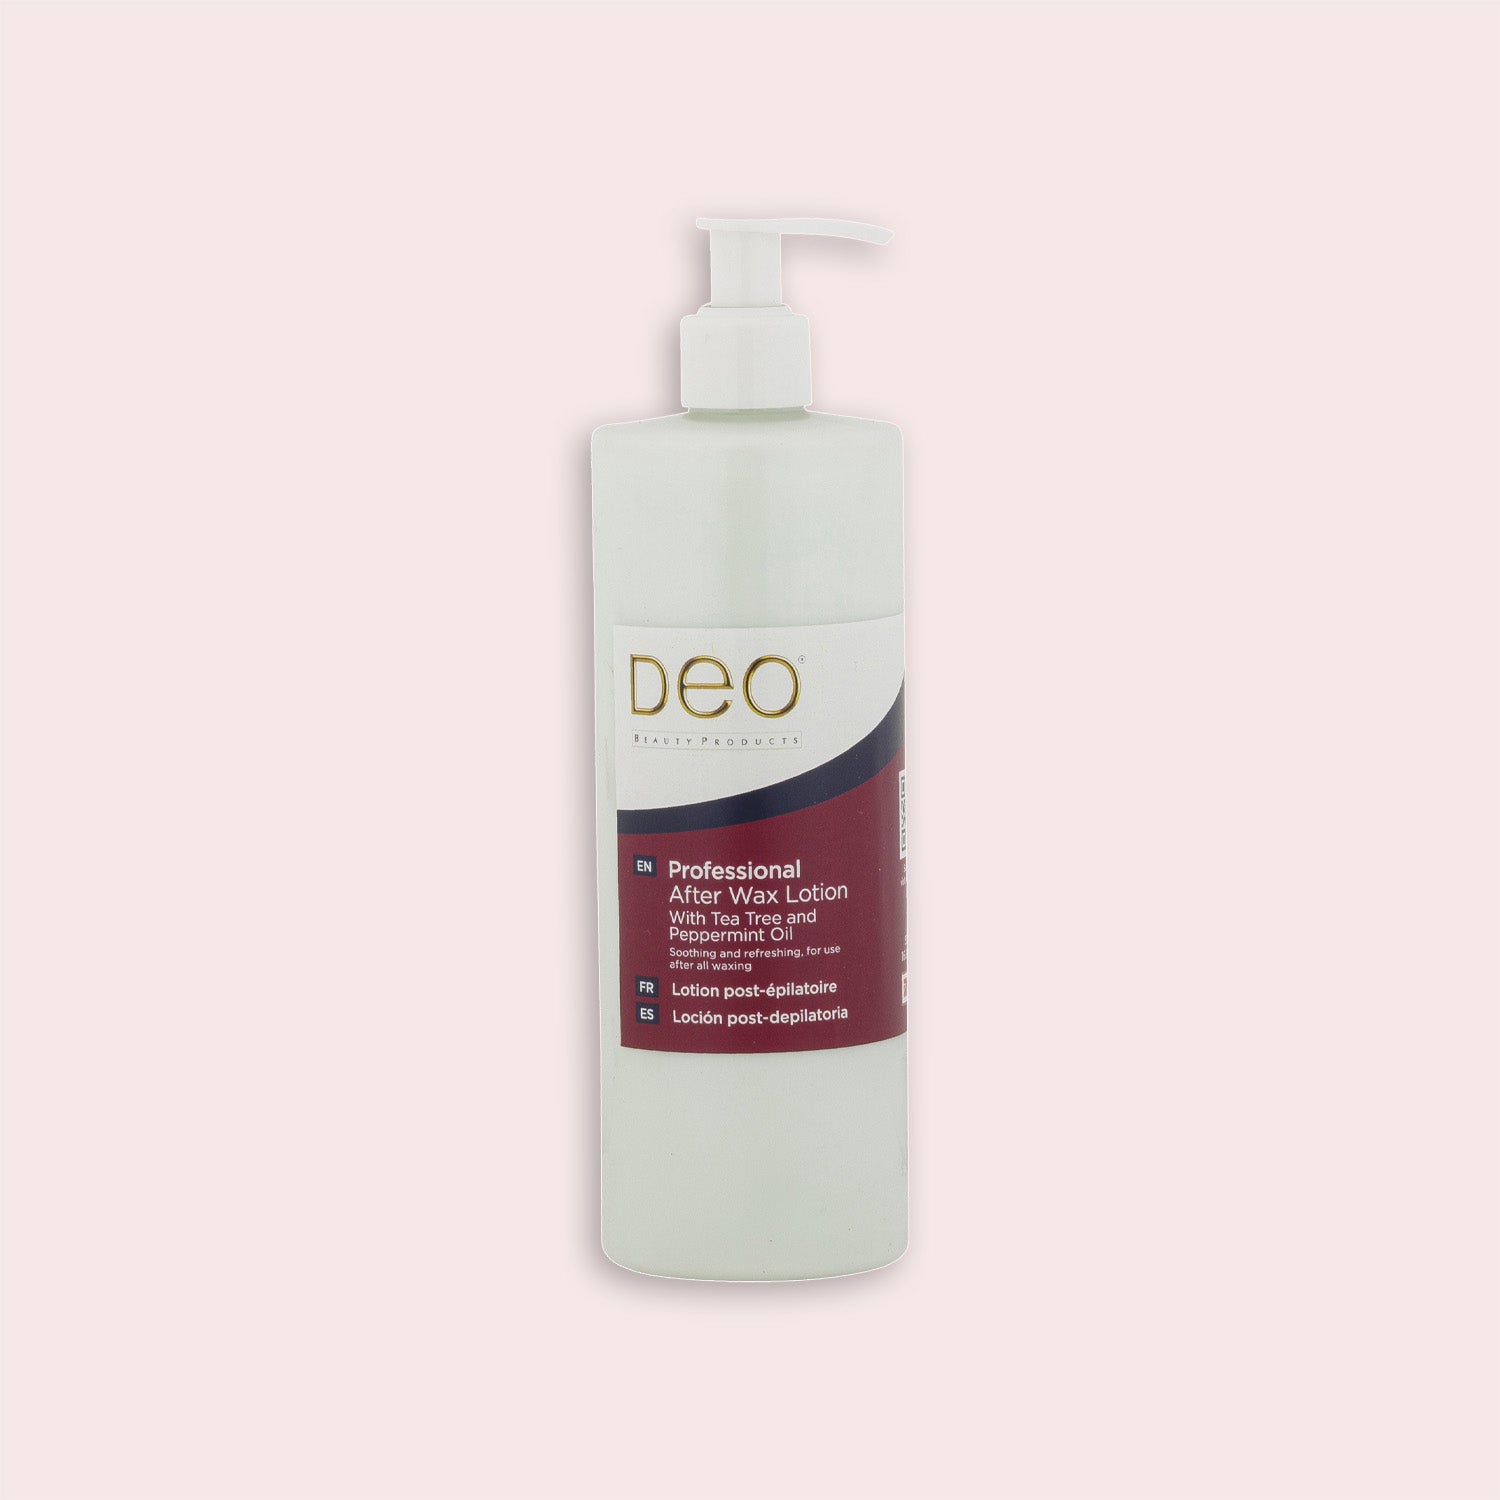 Deo After wax Lotion 500ml / 16.9fl.oz.